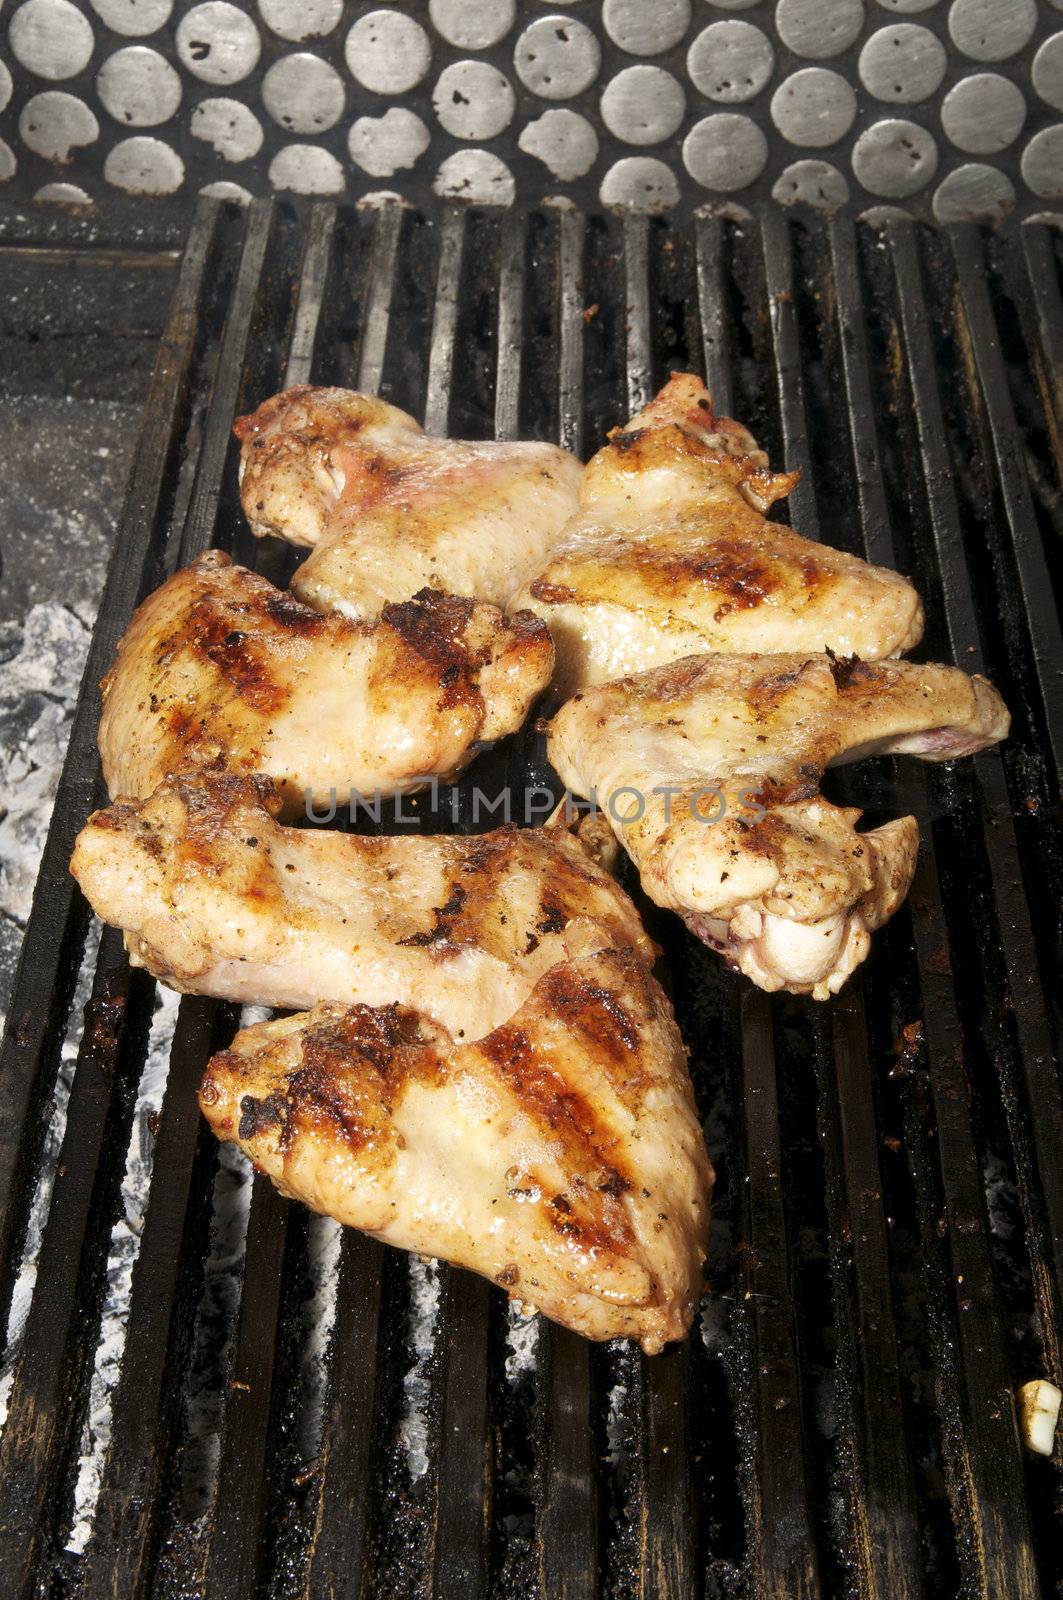 Bake the chicken wings on grill low heat